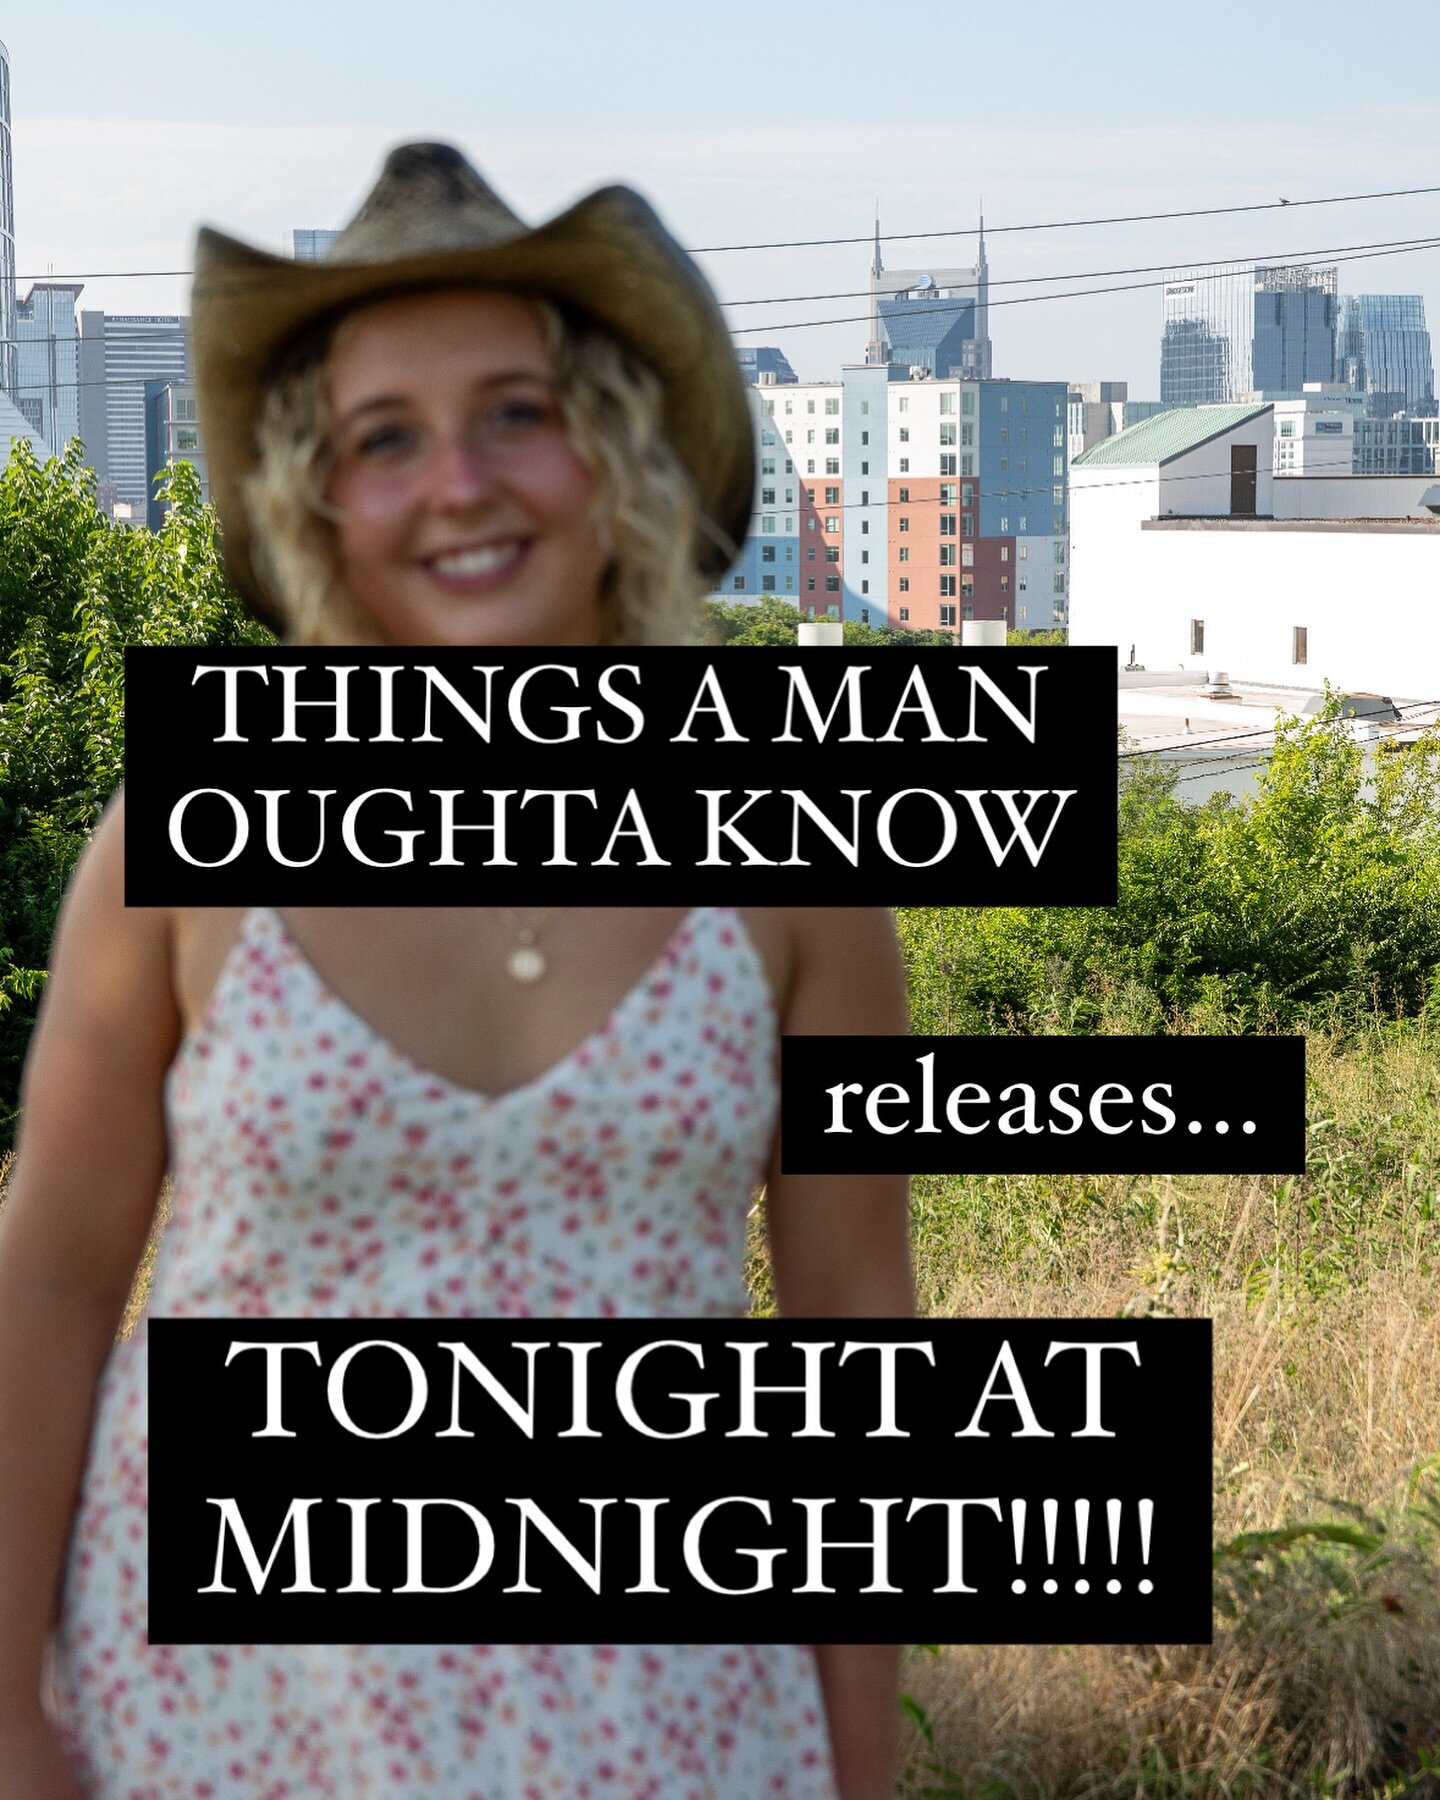 TONIGHT at midnight!!! Things a Man Oughta Know being released!!! Can&rsquo;t wait🤍🤍 #HKR #thingsamanoughtaknow #laineywilson #release